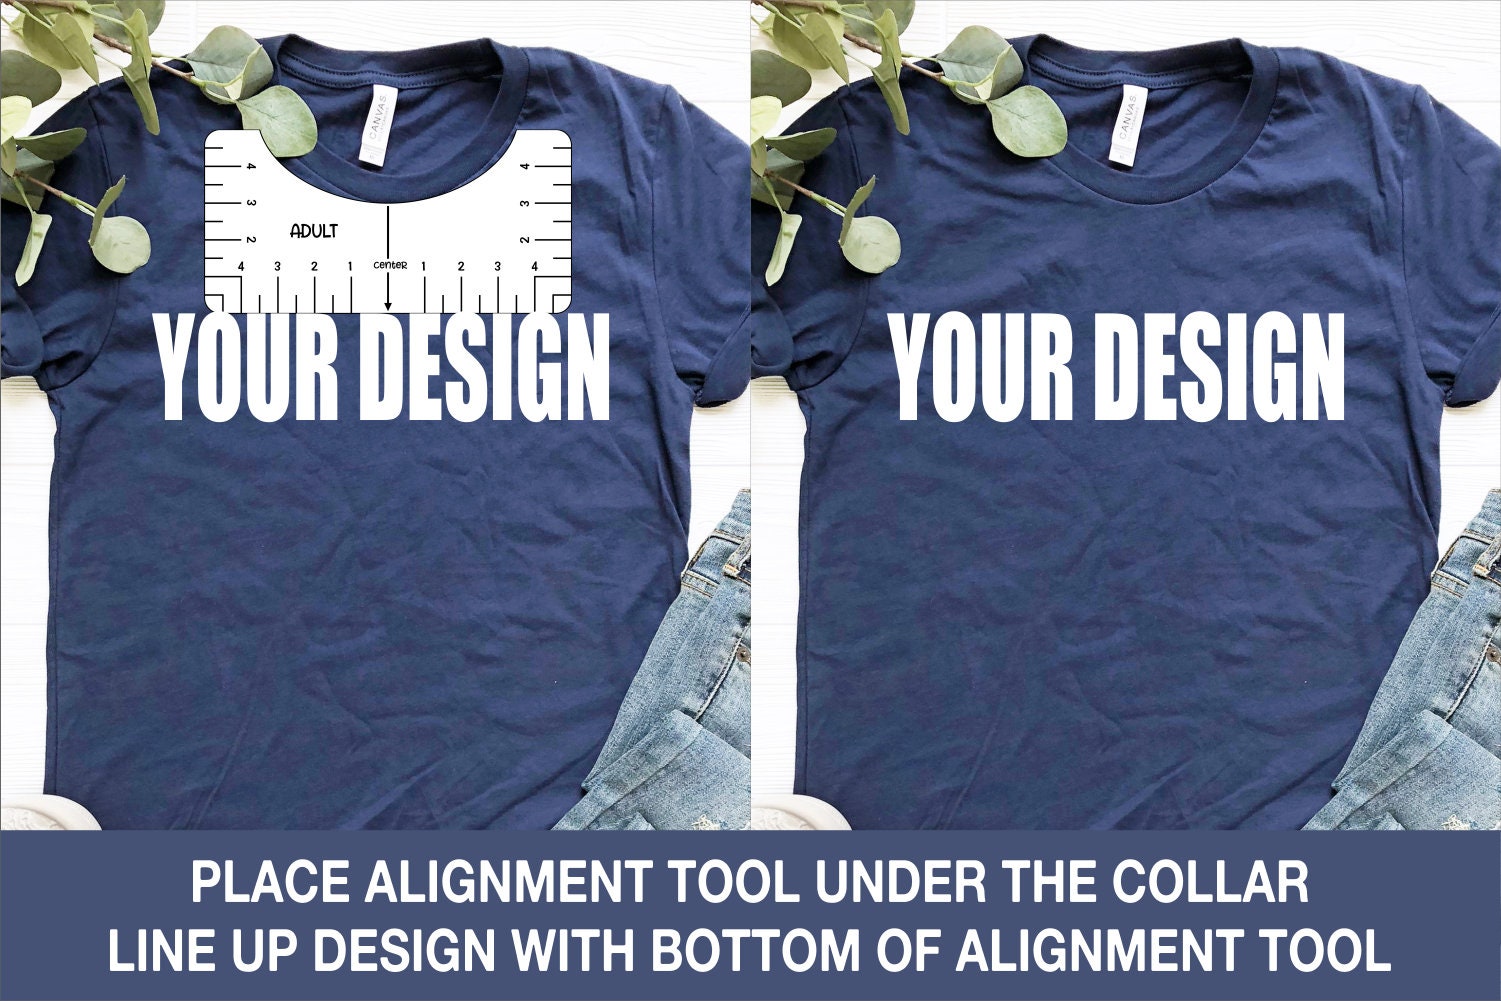 HOW TO LINE UP DESIGNS ON T-SHIRTS USING A PDF ALIGNMENT TOOL